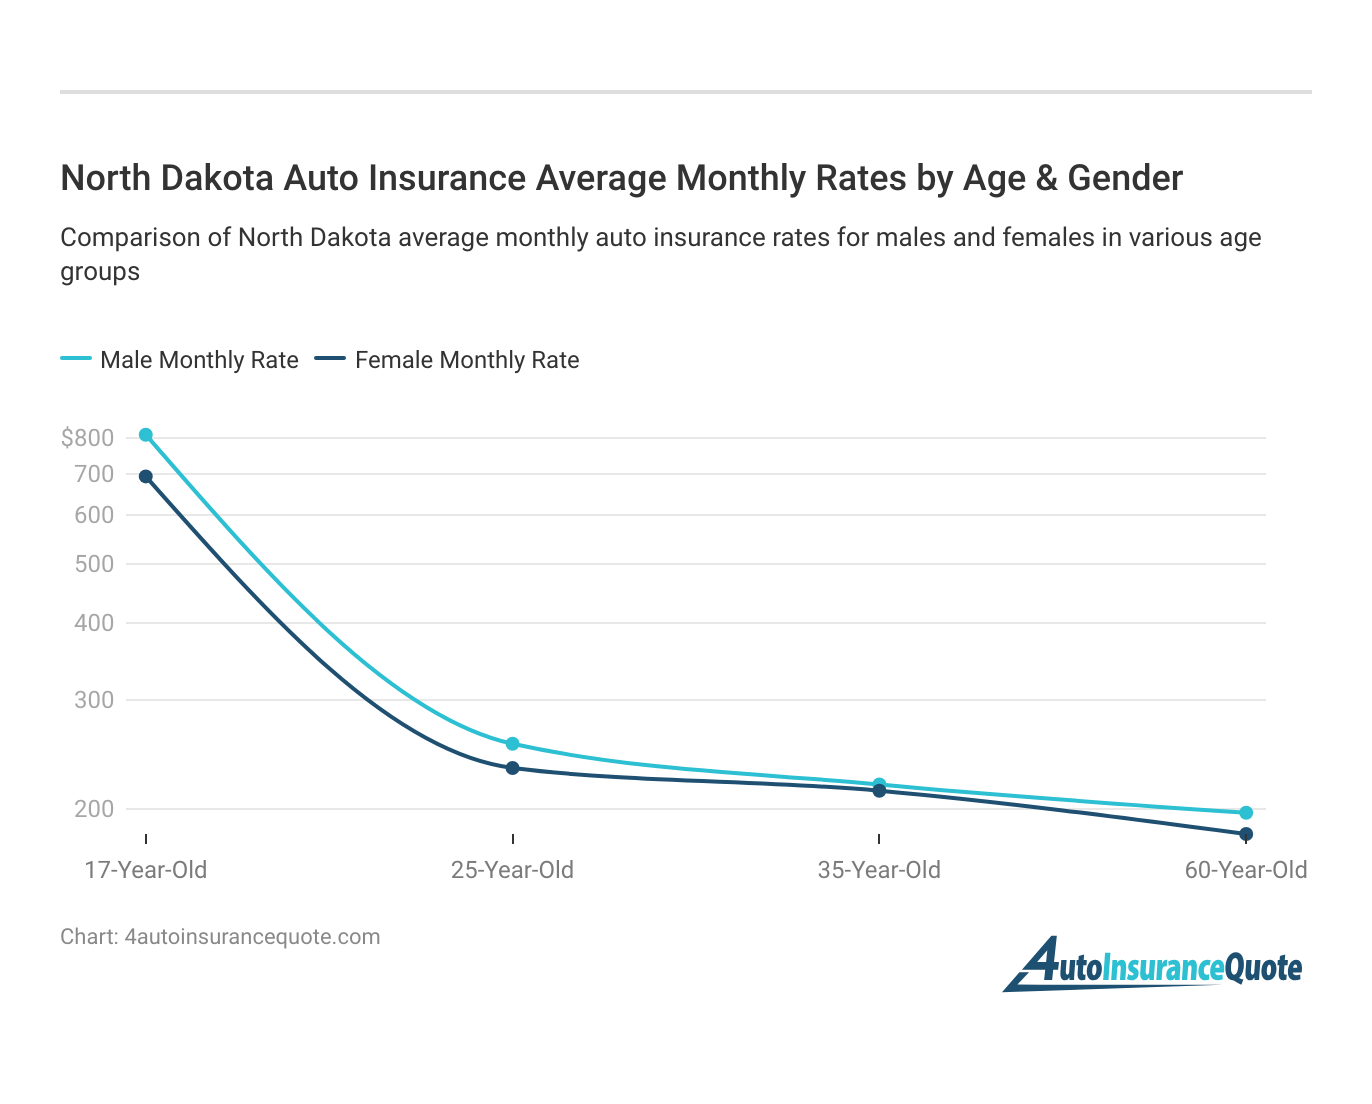 <h3>North Dakota Auto Insurance Average Monthly Rates by Age & Gender</h3>